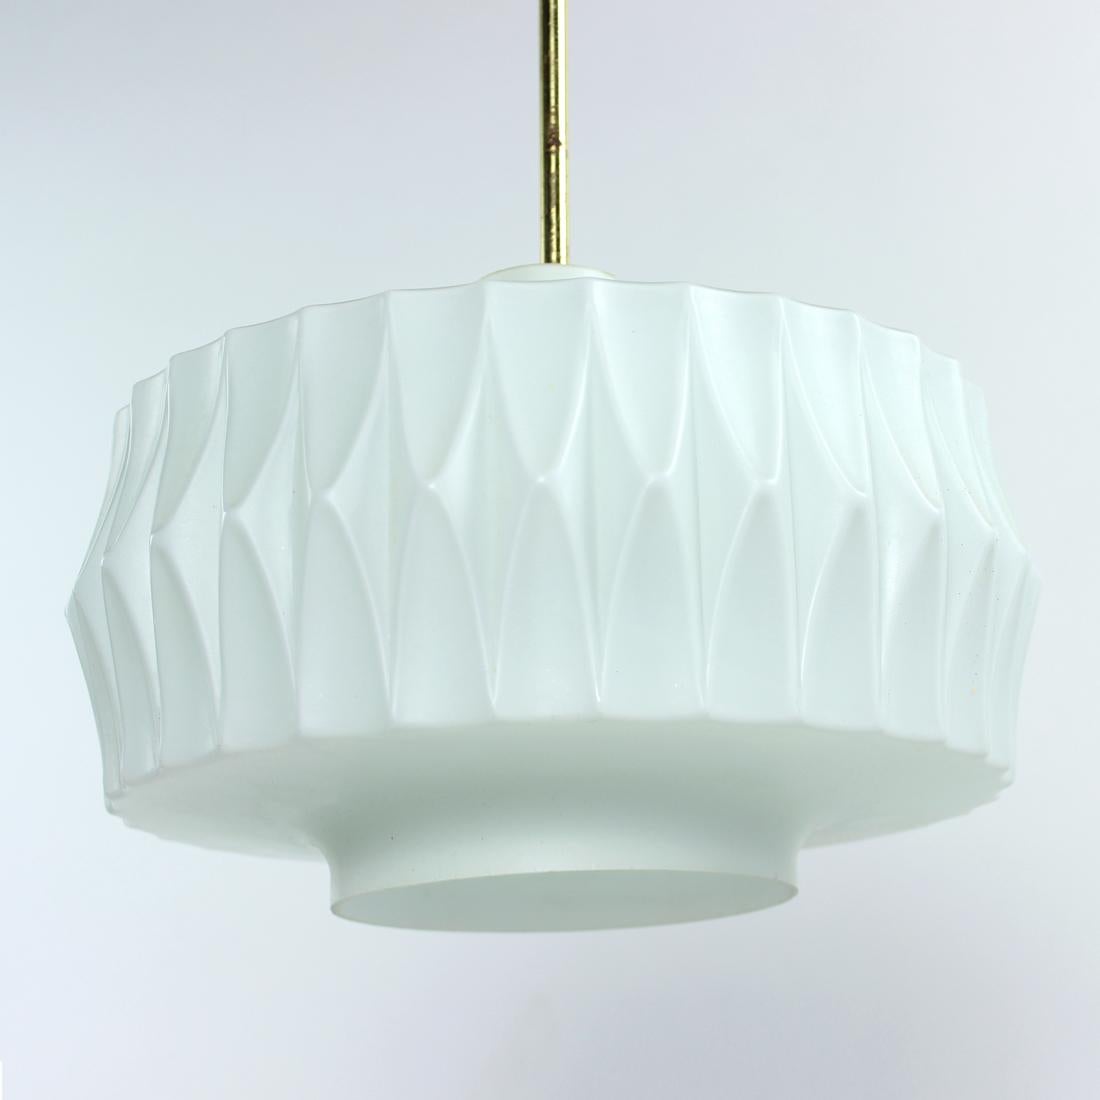 Mid-20th Century Midcentury Ceiling Pendant in White Glass and Brass, Czechoslovakia, 1960s For Sale